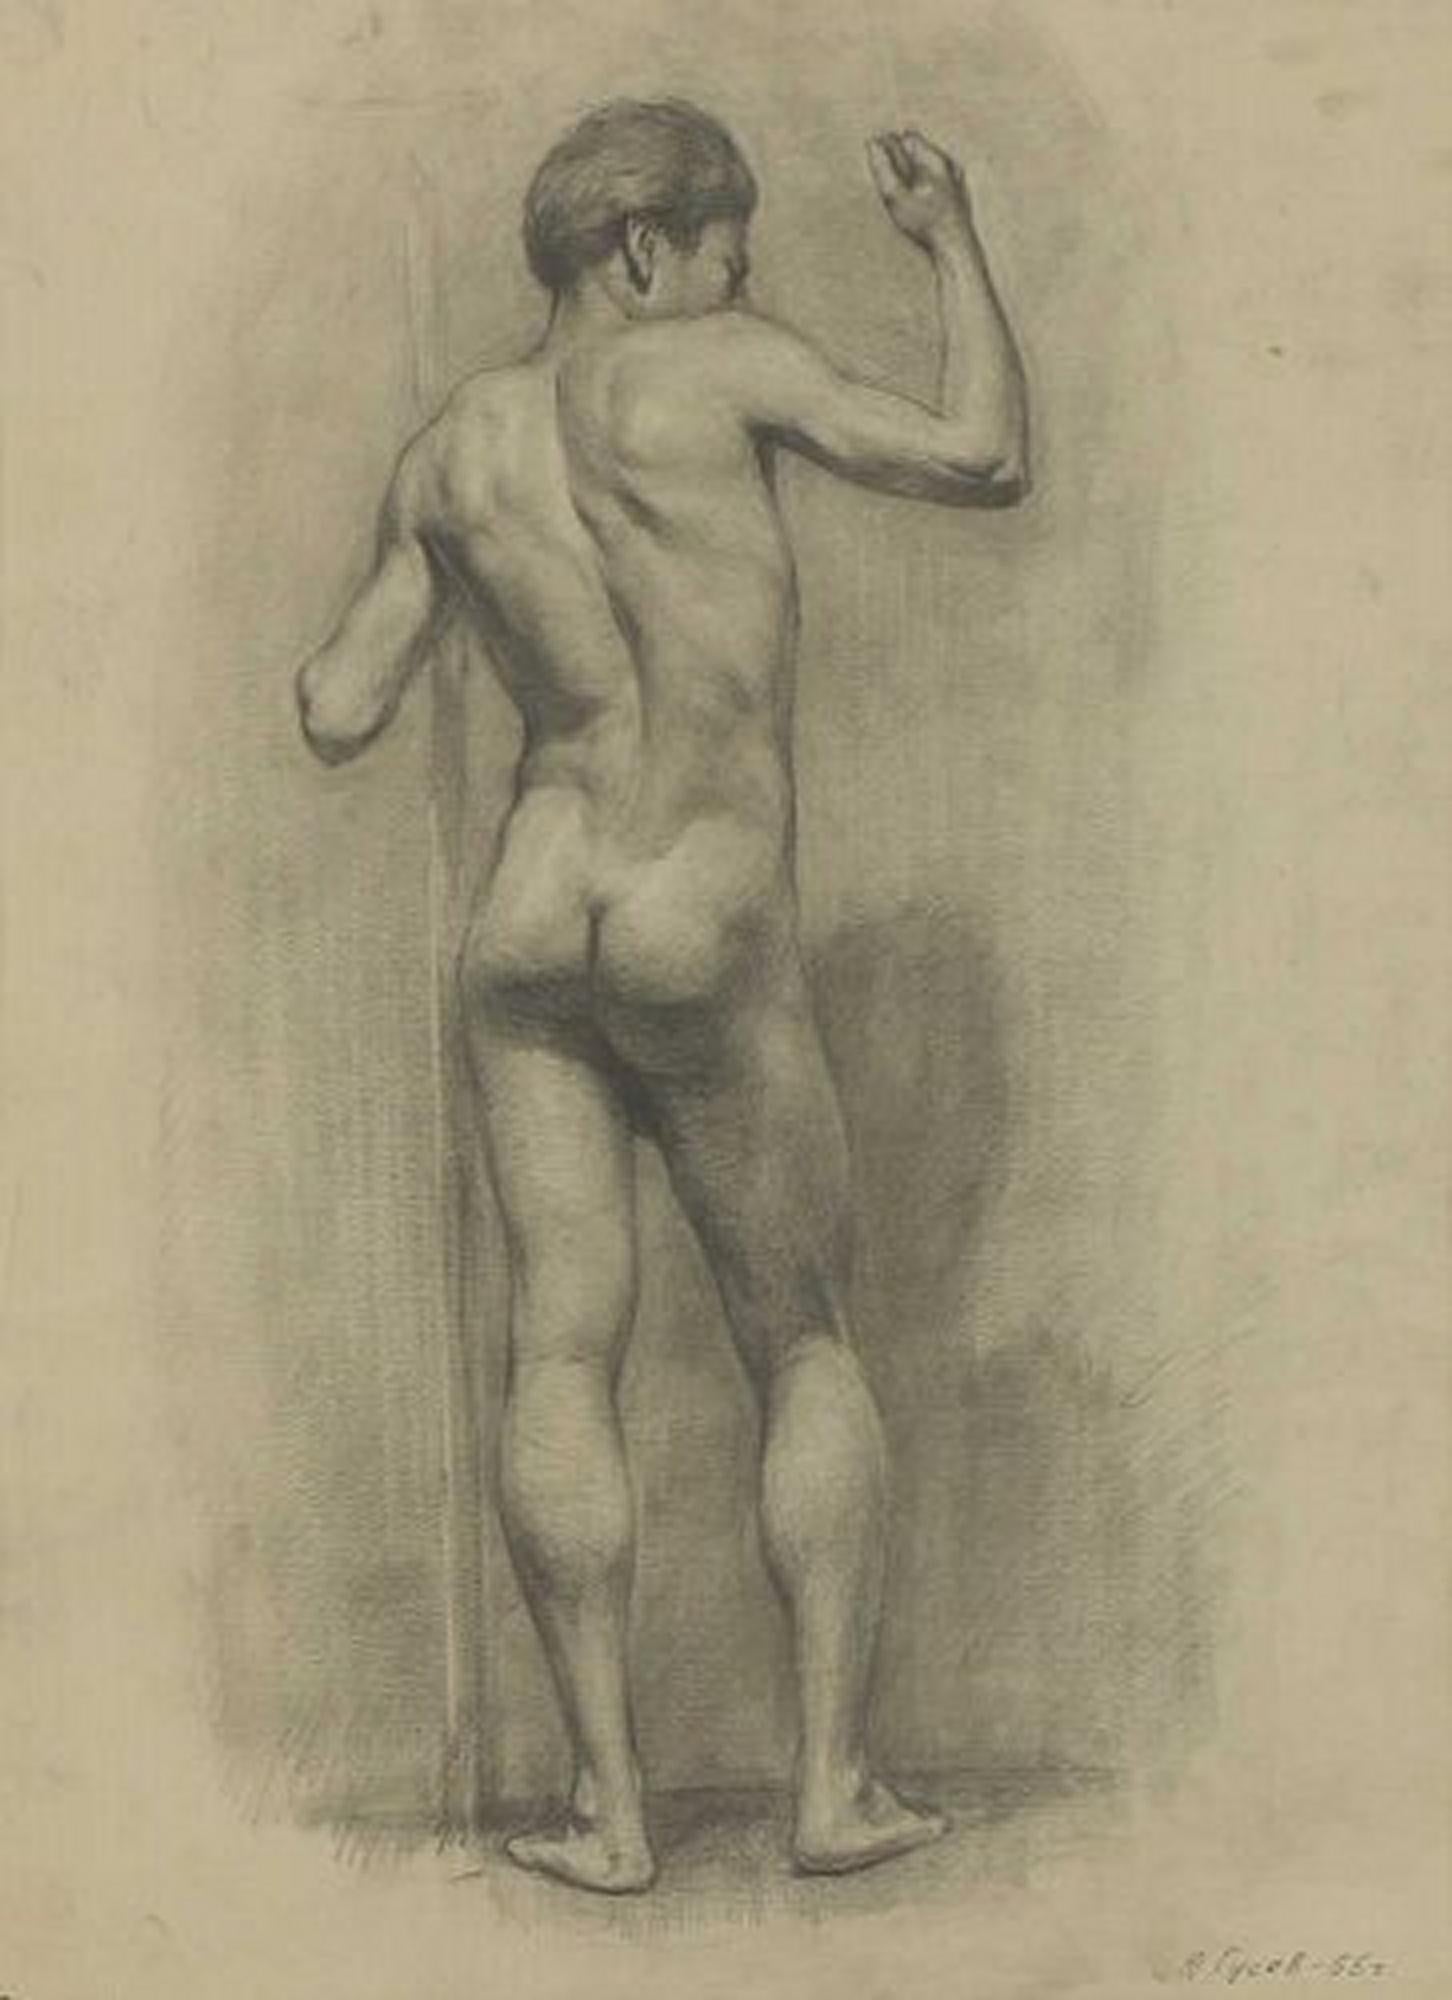 Yuri Gusev (Russian, 1928-2012) Young standing male nude signed and dated '55 l.r., pencil
Measures: 61 × 45cm.

Yuri Gusev was born in Moscow in 1928. Studied at Moscow Intermediate Art School until 1947. Then graduated from Moscow Art Academy